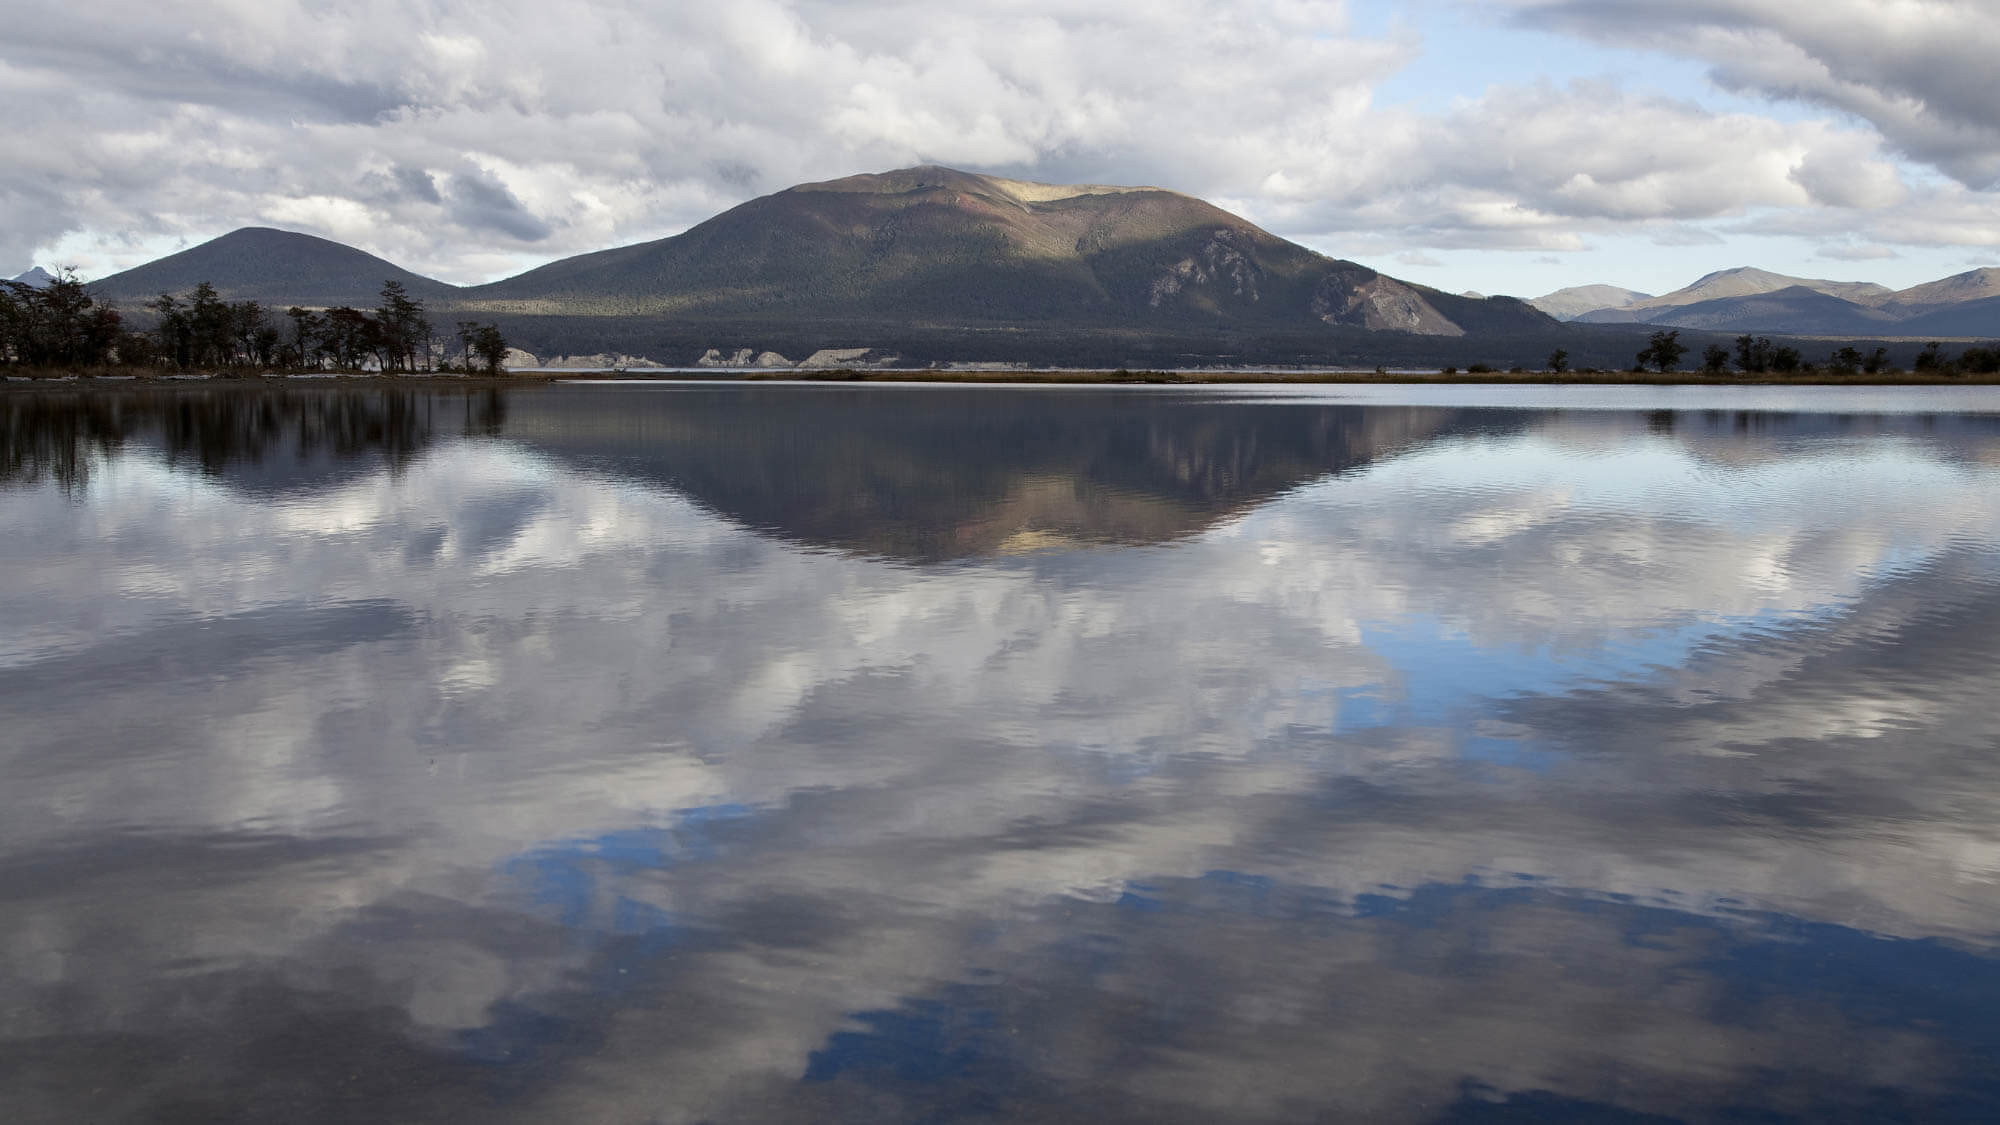 Reflection of the mountains on Lake Fagnano in Ushuaia